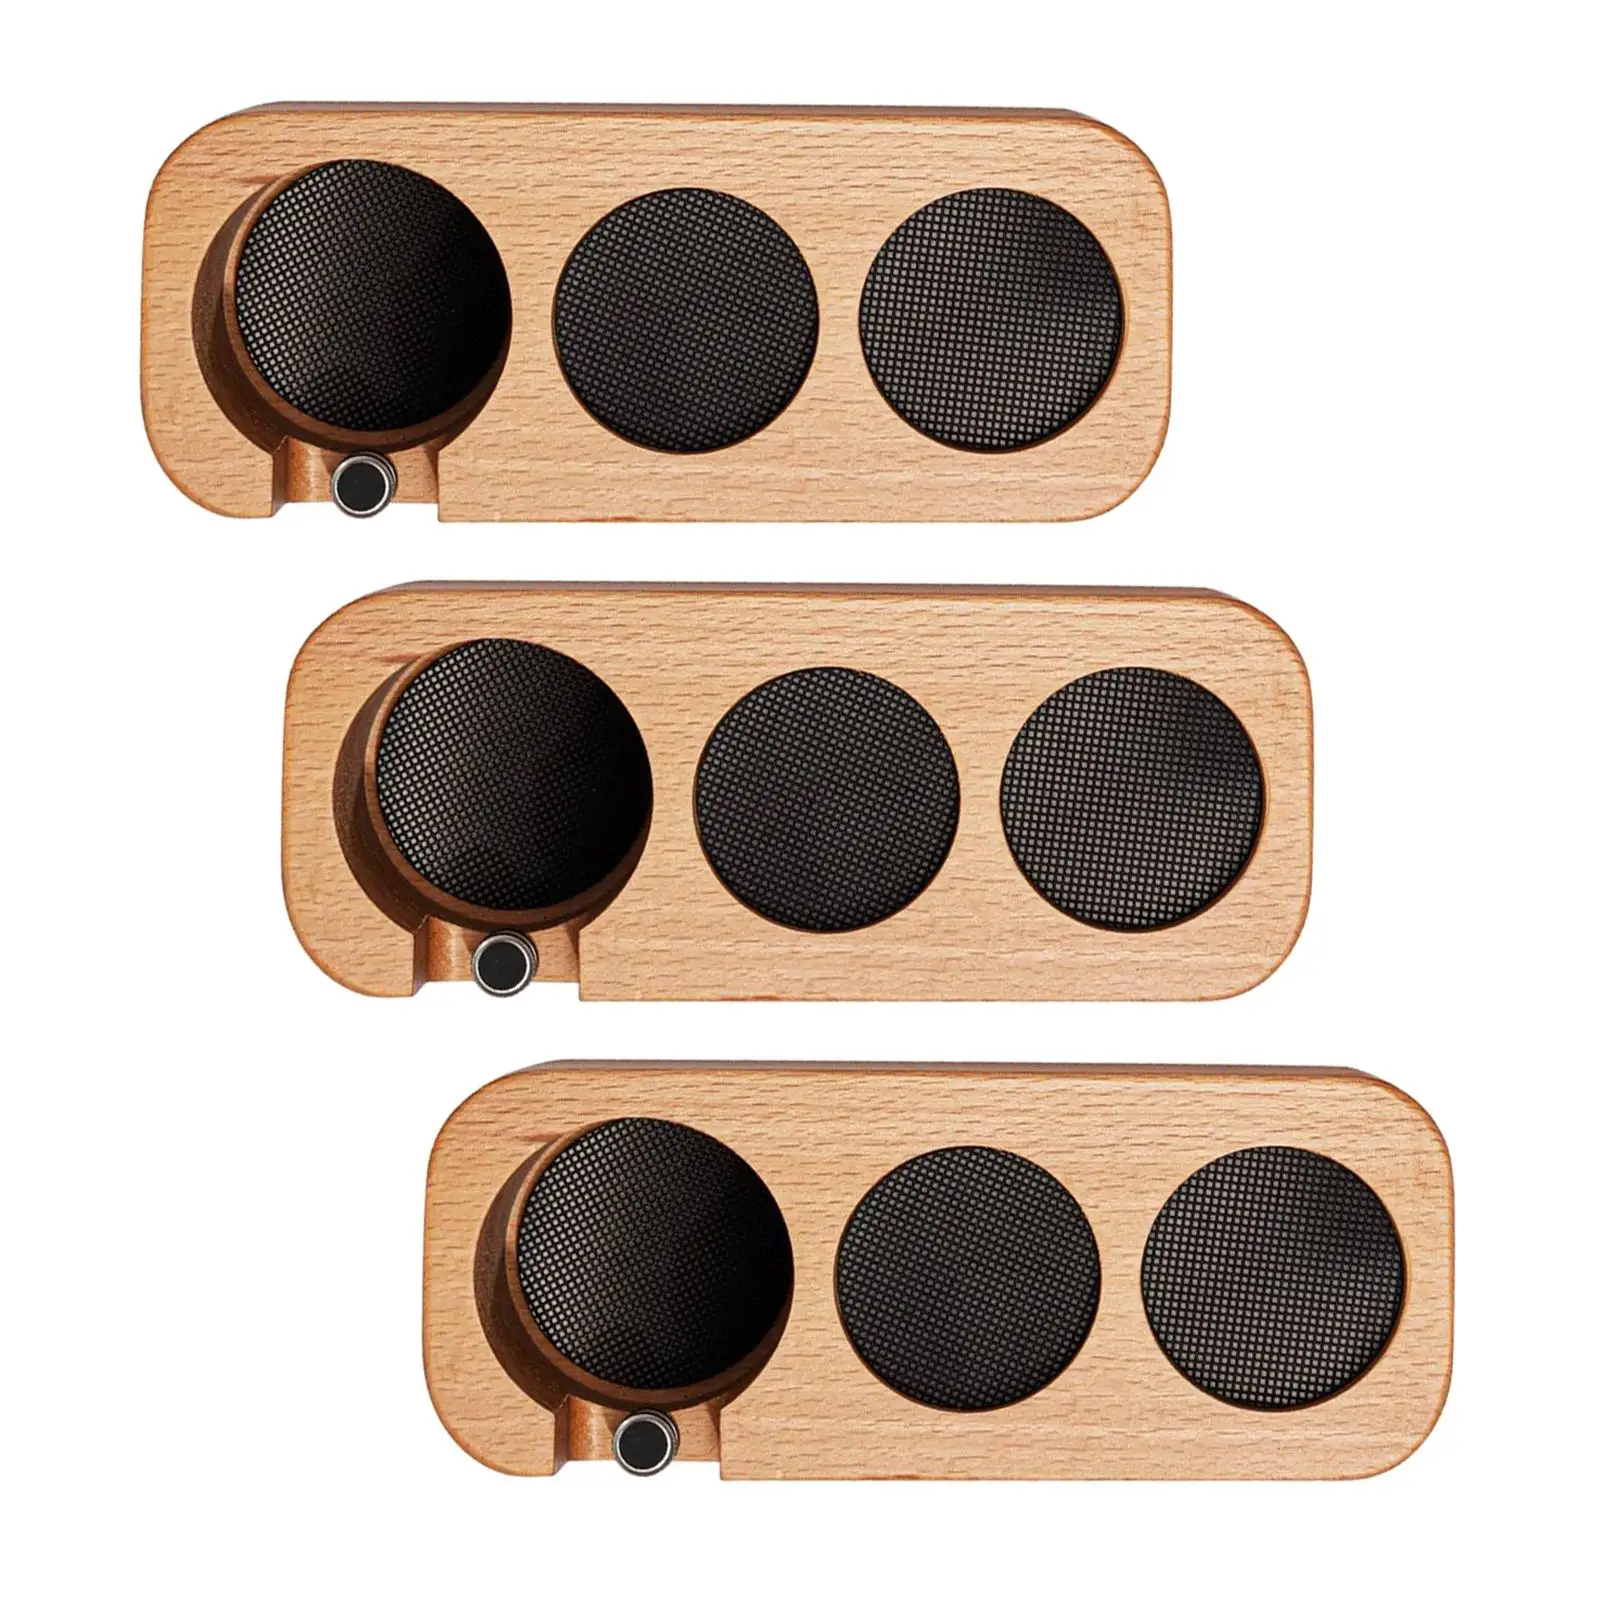 Coffee Filter Tamper Counter Organizer Wood Coffee Dividers Stand with 3 Holes